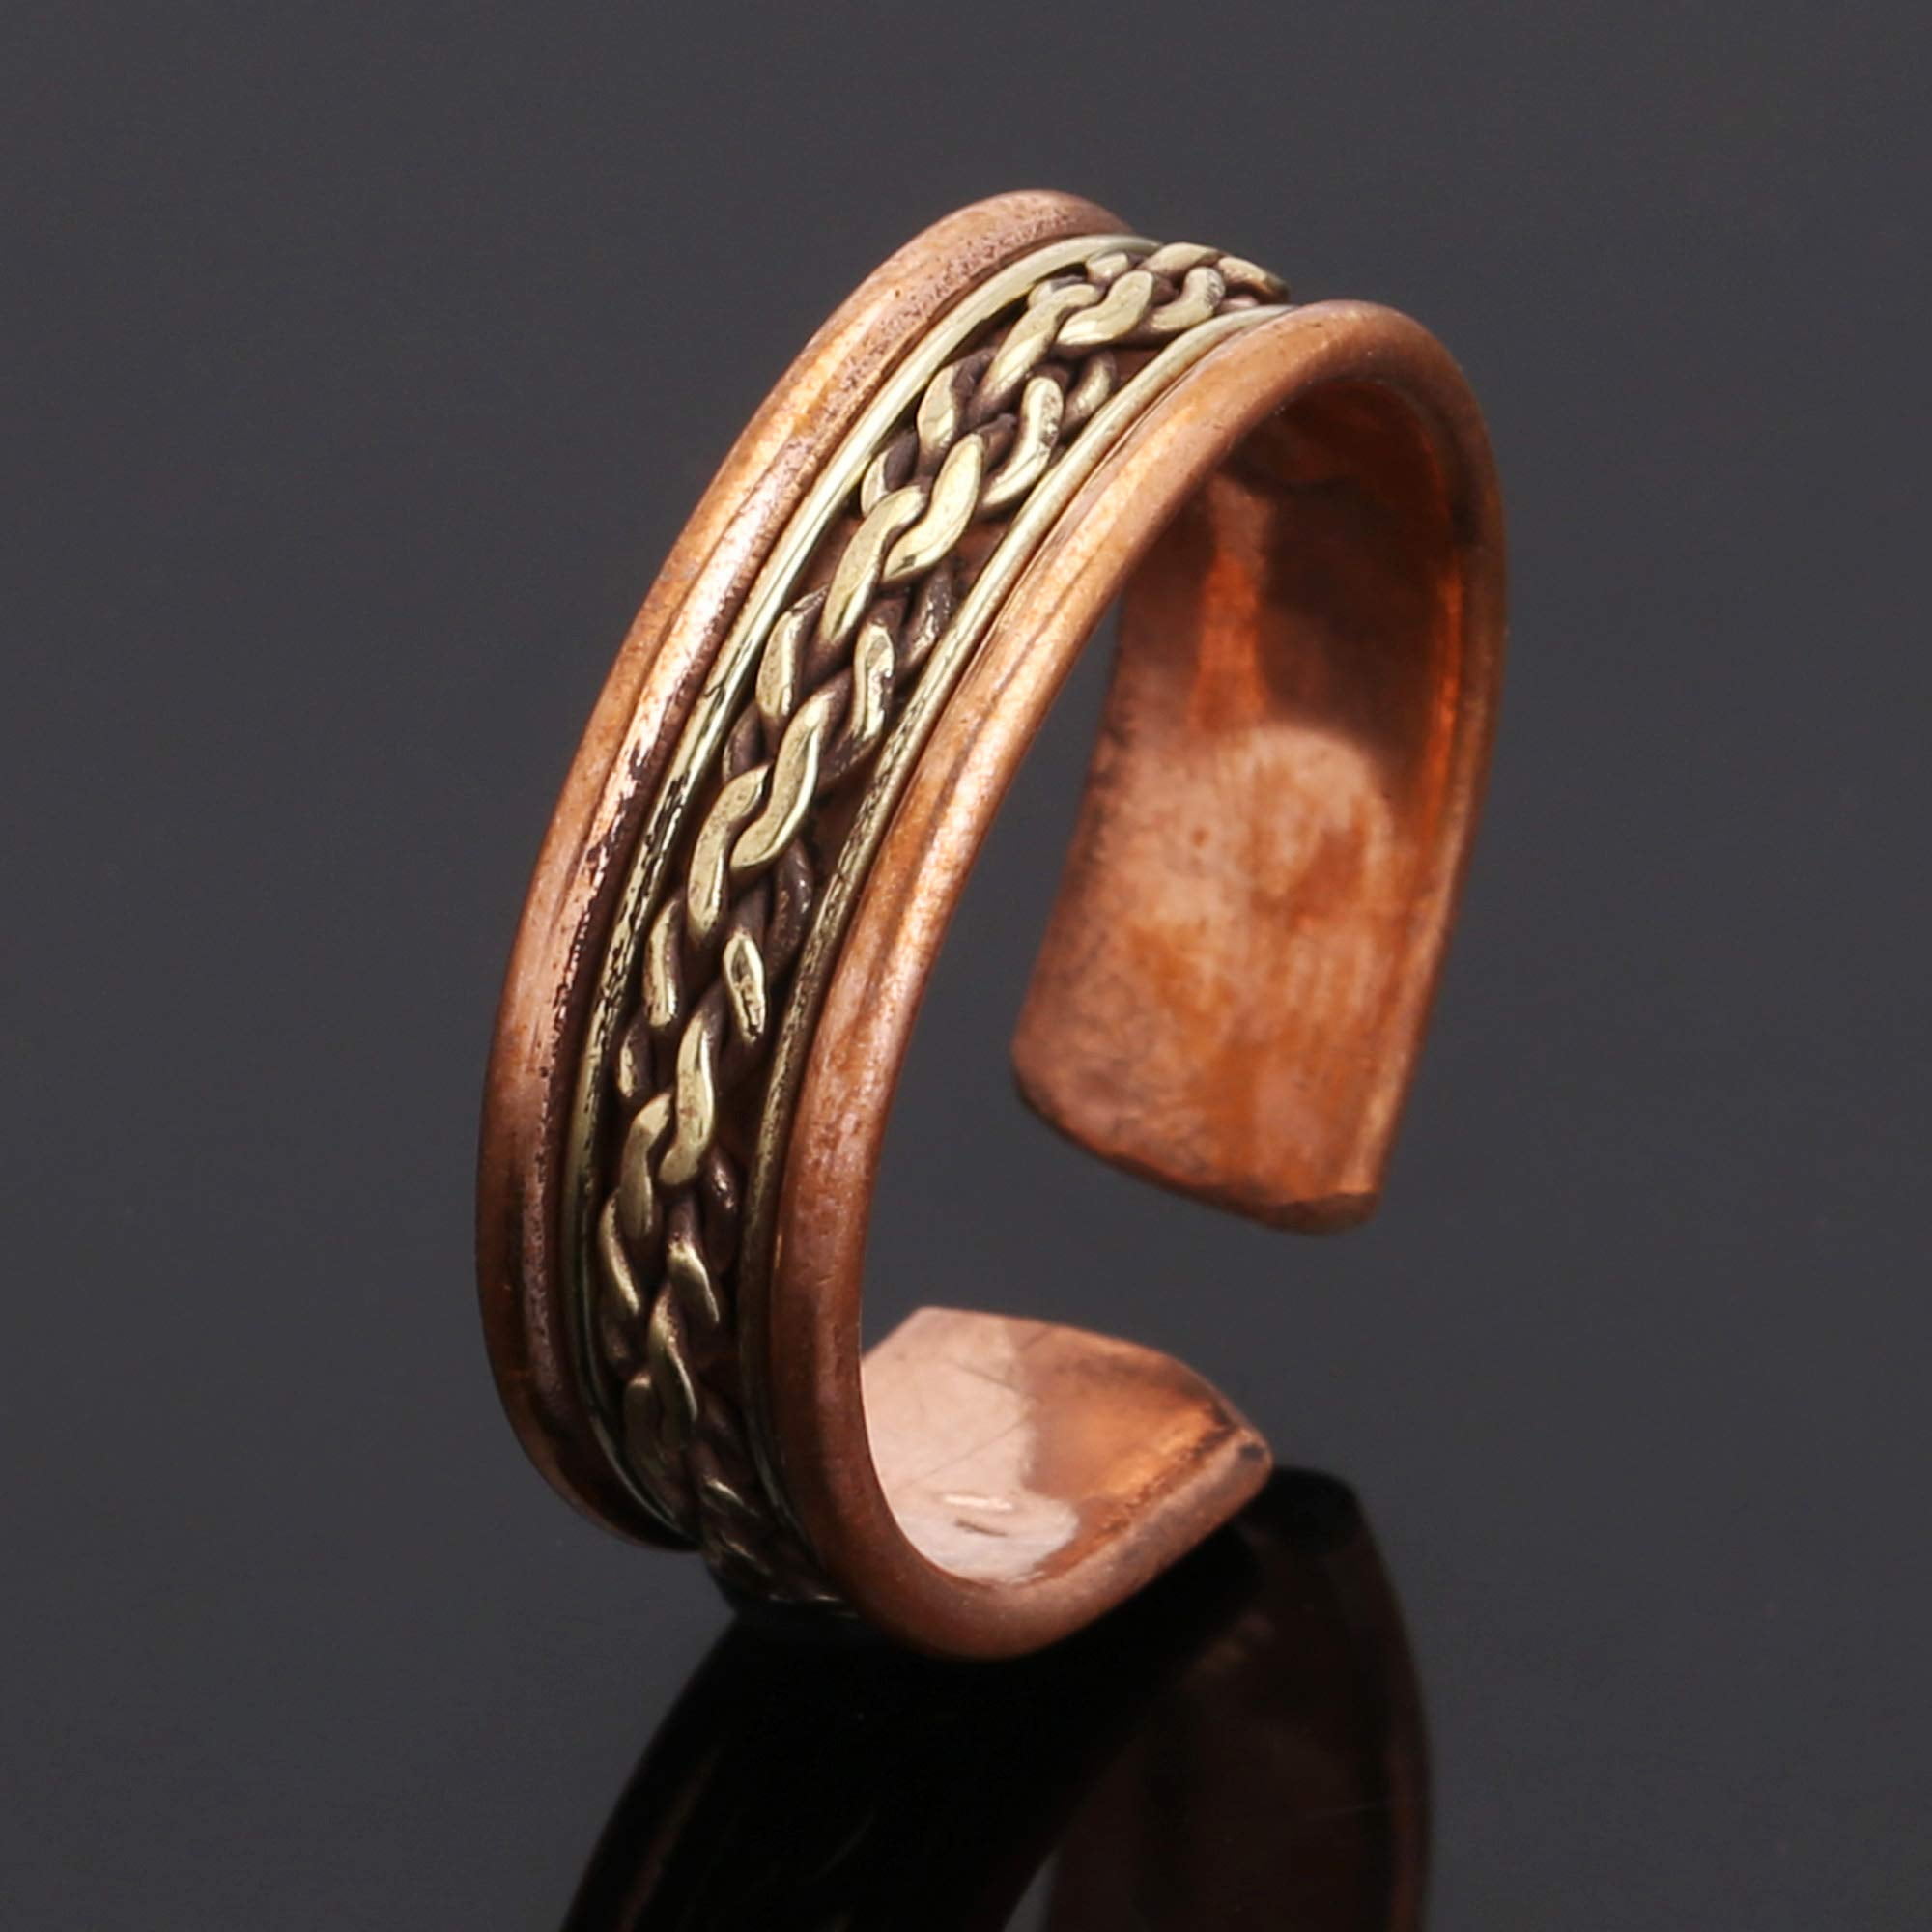 iCraftJewel 100% Pure Copper Thumb Ring Bio Healing Pain Reliever Fashion Jewelry Gift Item 